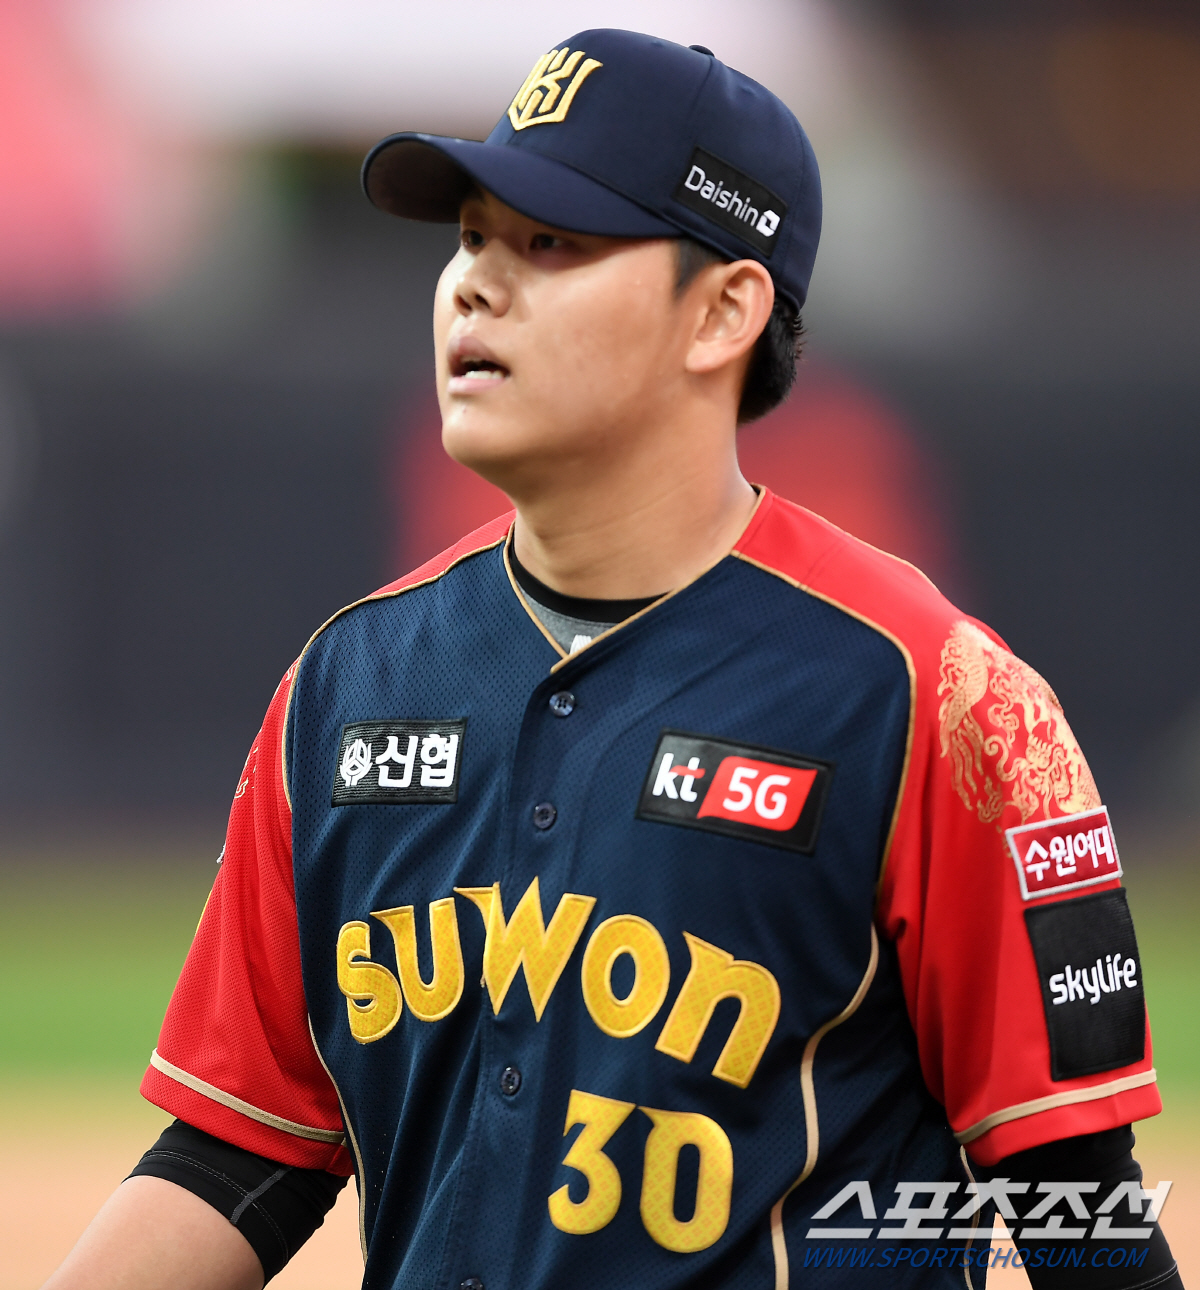 Newbie? Miracles Dreaming Doosan, LG Lee Min-ho  KT Mini StandardDoosan Bears again 19 years old in Game 1 of seriesIm going to face a rookie: Will Mini Standard be different?Doosan opponents 5 Kyonggi 3-1, 2823 innings, Earned run average 2.51.This is why KT Wiz coach Lee Kang-chul gave Mini standard the heavyweight of the first round of the playoffs (PO).Doosan also faced LG Twins Lee Min-ho in the first round of the last semi-PO.Lee Min-ho also had a strong Earned run average of 2.57 in regular season Doosans former 4Kyonggi.He also played in the first game of the semi-PO, but he gave up five hits and four walks, including one home run in 313 innings, and scored three runs and wrote a bruise of defeat.Mini standard is likely to be Rookie this season: Strong Heart, which led KT to second place in the regular league, winning every difficult time the team was in trouble.It is because of the directors trust that he chose Mini Standard as the first starter, even though there are two foreign Pitchers, Audrey Samer Despayne and William Cuevas.The style of the Mini standard is different from Lee Min-ho.If Lee Min-ho is a style that is just a loser, Mini standard plays a pitching like a sloppy not age, which is why director Kim Tae-hyung says he is like a veteran, not a rookie.Doosan put Chris Flexen in the first-round pick; he twisted it once more from Game 2, Ace Raul Alcantara will start Game 3, and Choi Won-joon will start in Game 2.KT is likely to launch Despaine and Cuevas in order after the Mini standard.Unlike JunPO, both teams are Kyonggi in the indoor Gocheok Dome, so it is also a variable that both teams are working on Kyonggi in a relatively warm environment.Doosan also made 19 years oldCan we lay the groundwork for the Korean series beyond selection? Will Mini Standard prove different to Lee Min-ho?Doosan and KTs PO Game 1 will face off at Goche Dome at 6:30 pm on the 9th.